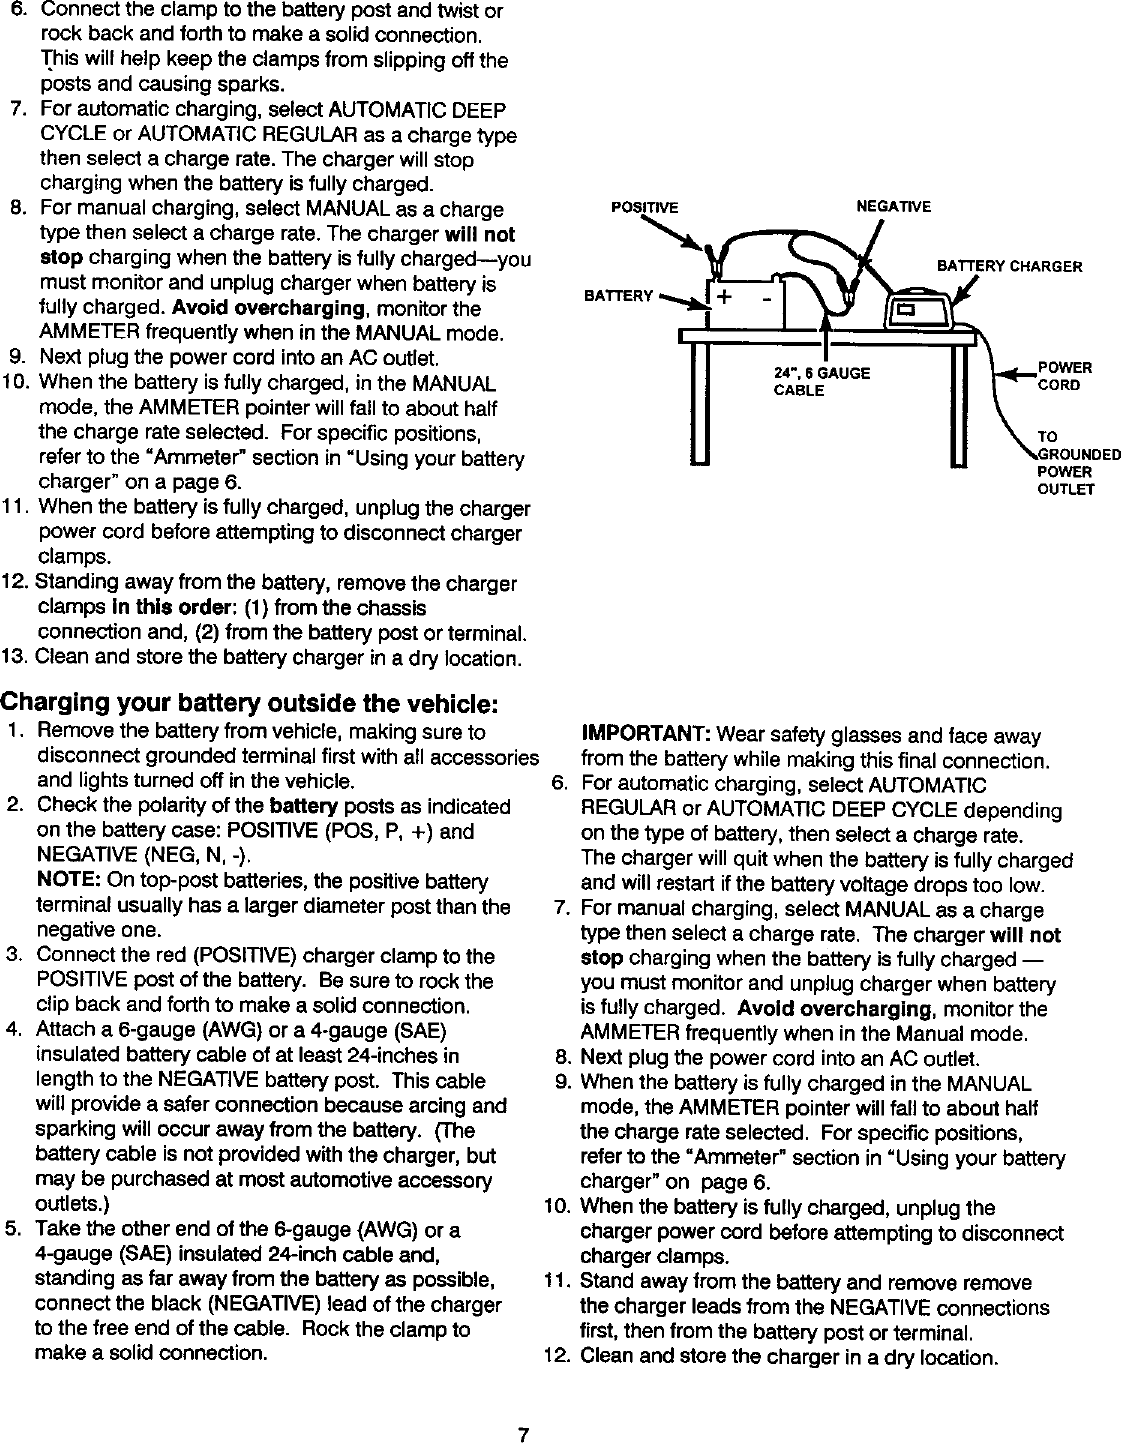 Page 8 of 12 - Diehard 20071312 User Manual  BATTERY CHARGER - Manuals And Guides L0305326